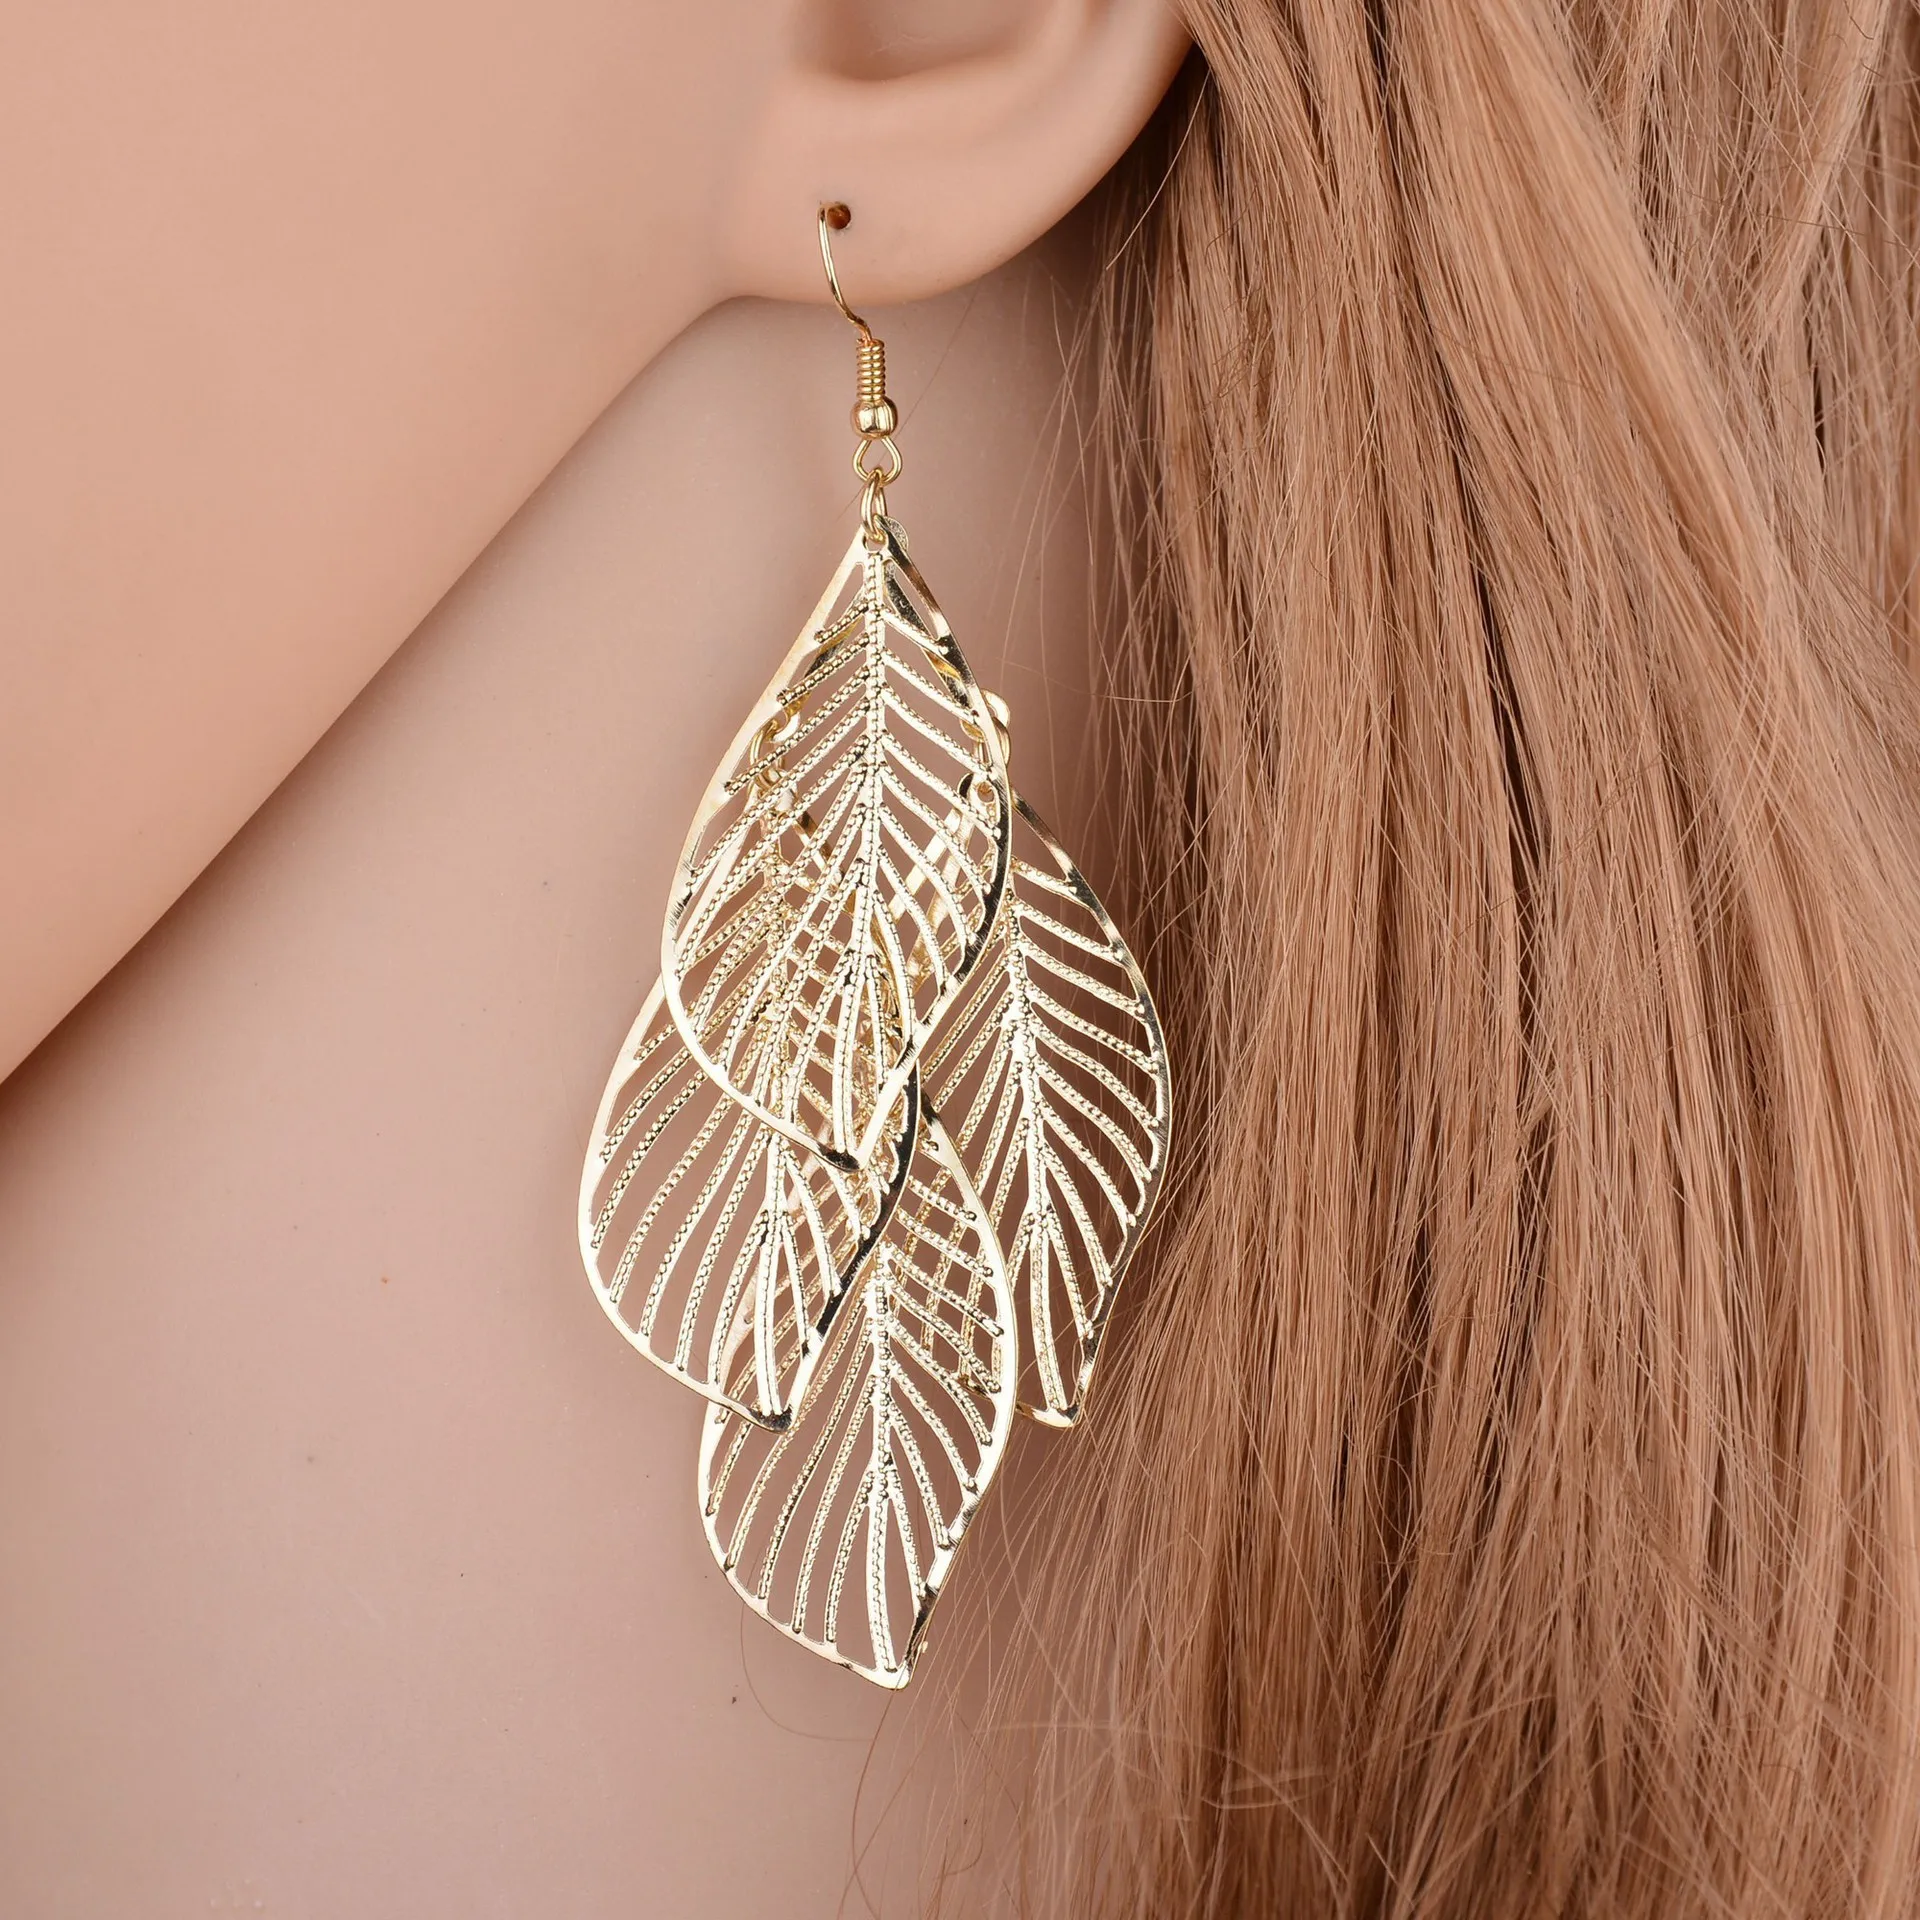 

Low moq wholesale korean ear studs fashion hand made jewelry gold maple leaf earring for women, Picture shows